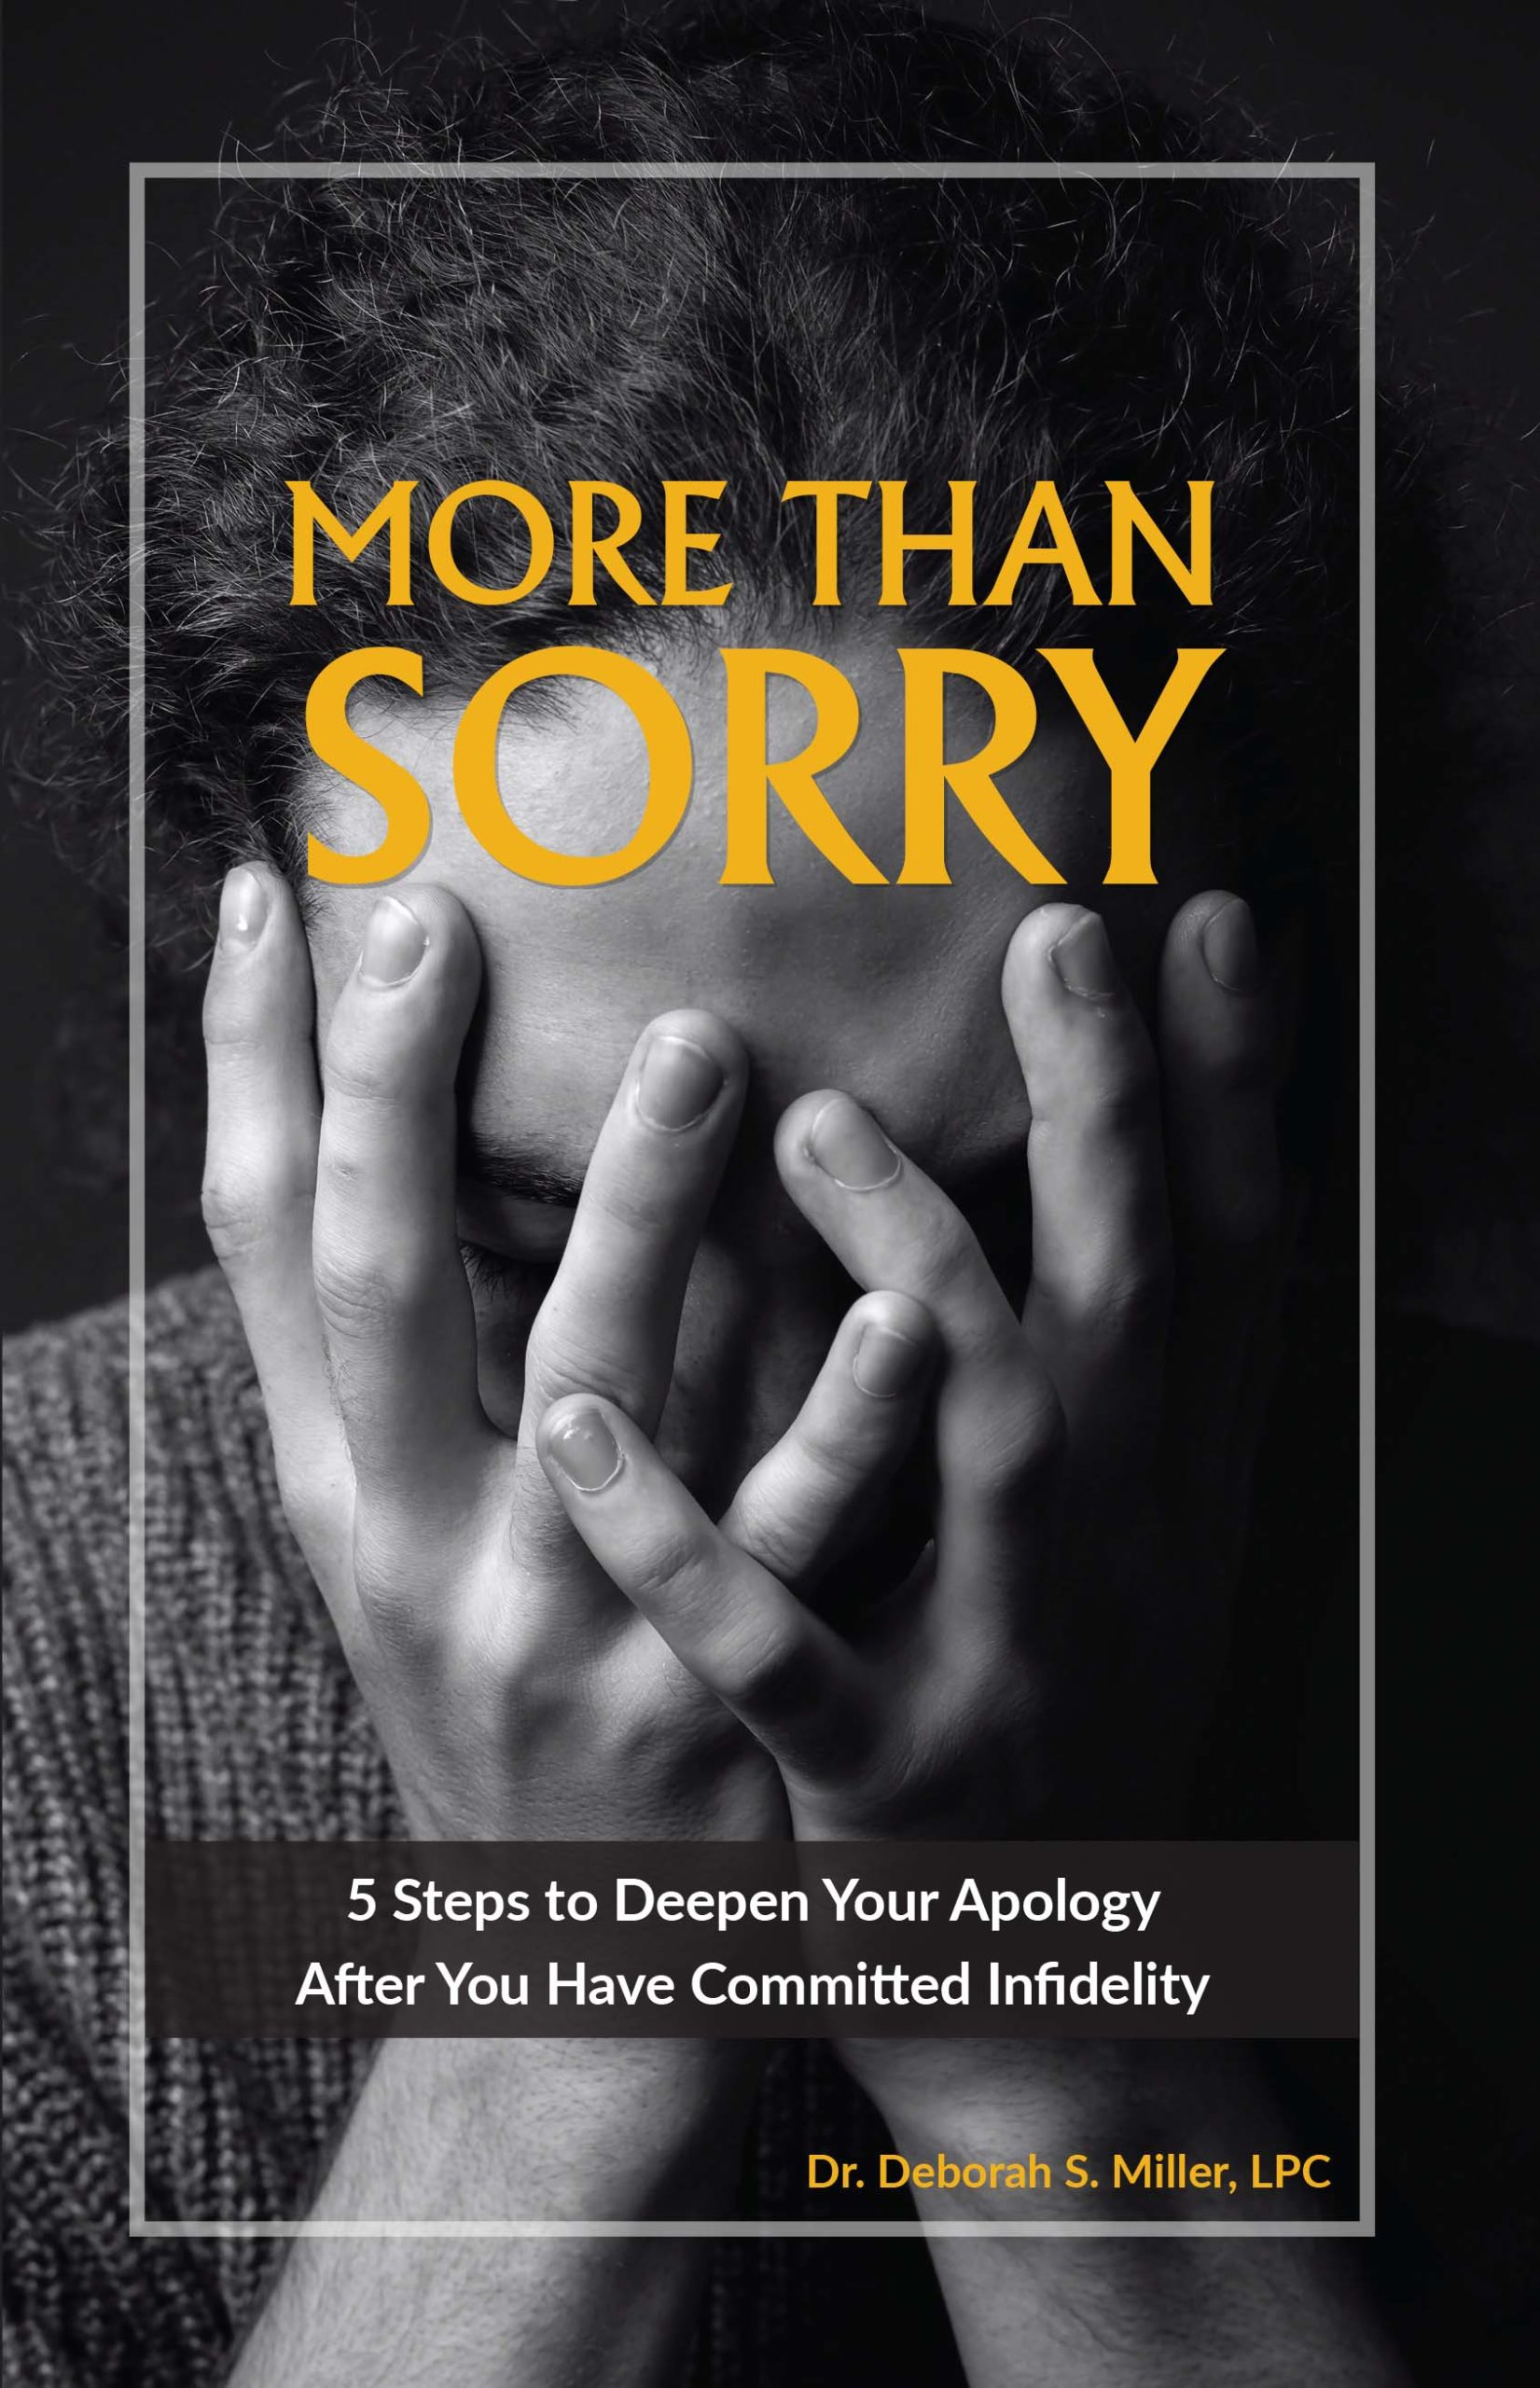 Photo of book "More Than Sorry"